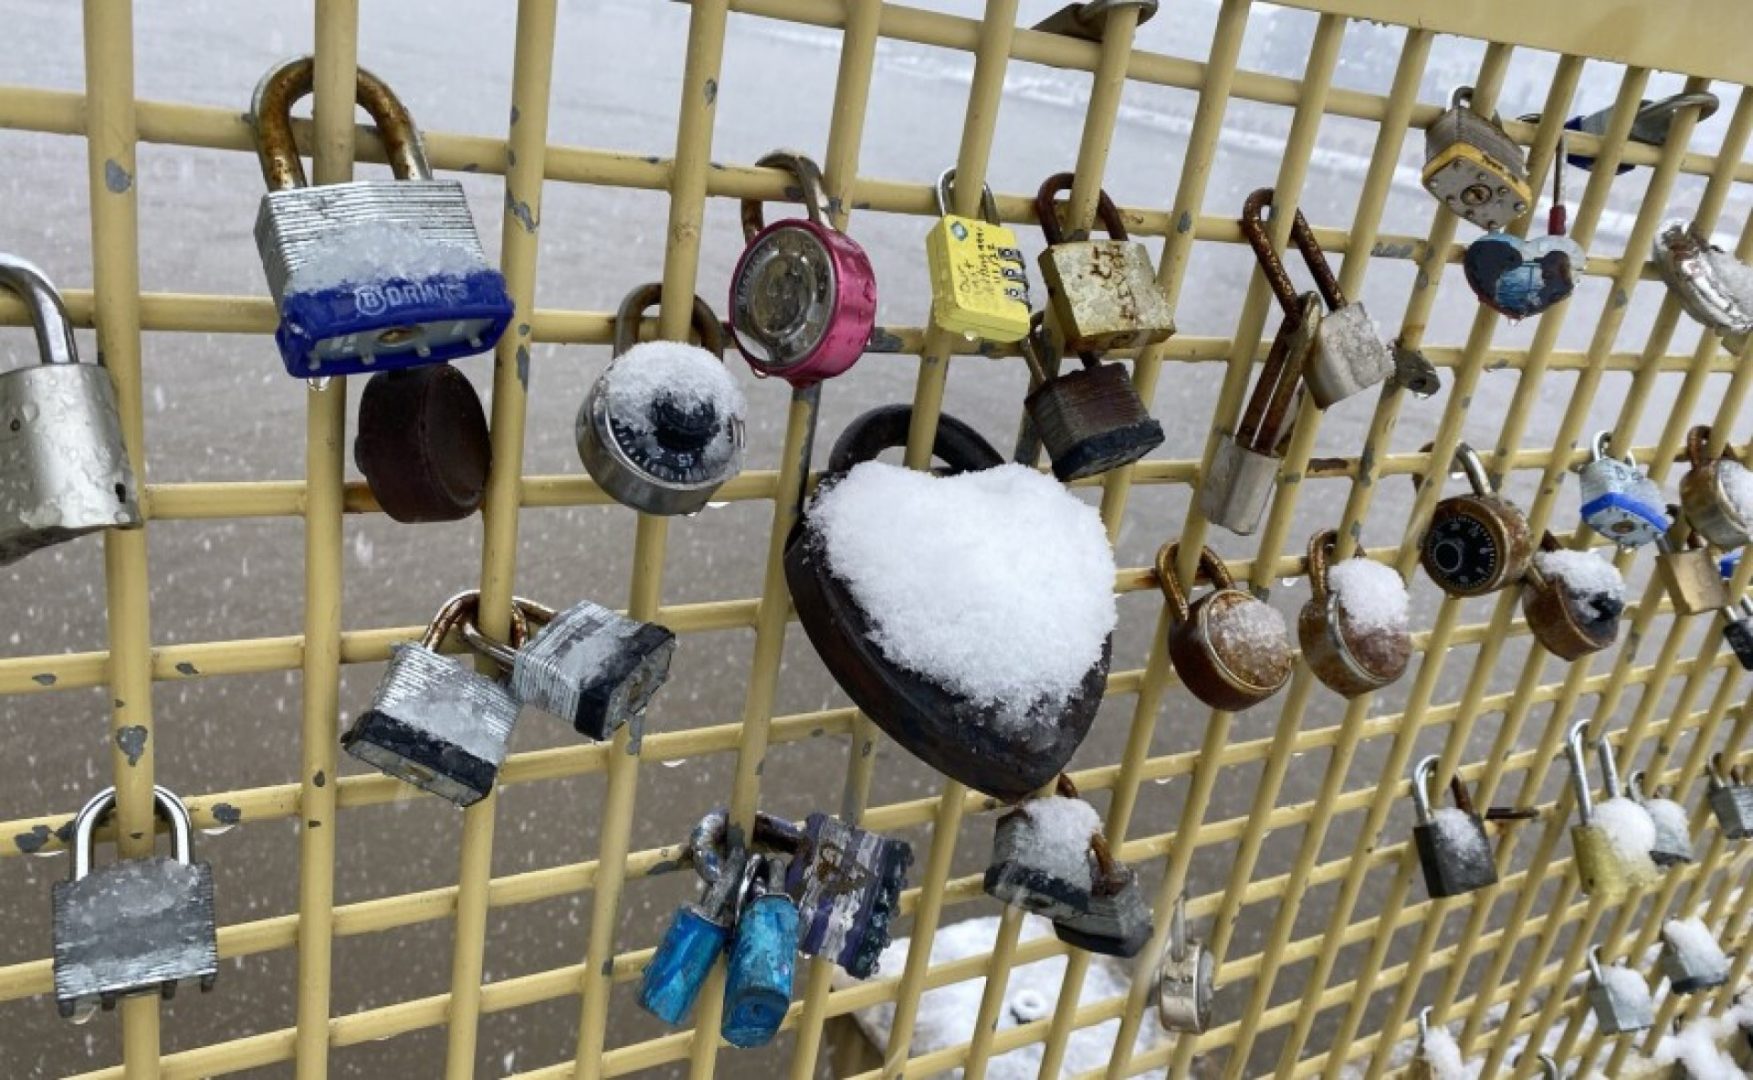 Allegheny County estimates there are 11,000 locks on the Roberto Clemente Bridge. They're asking that people not fasten more to the railings when the bridge reopens. 